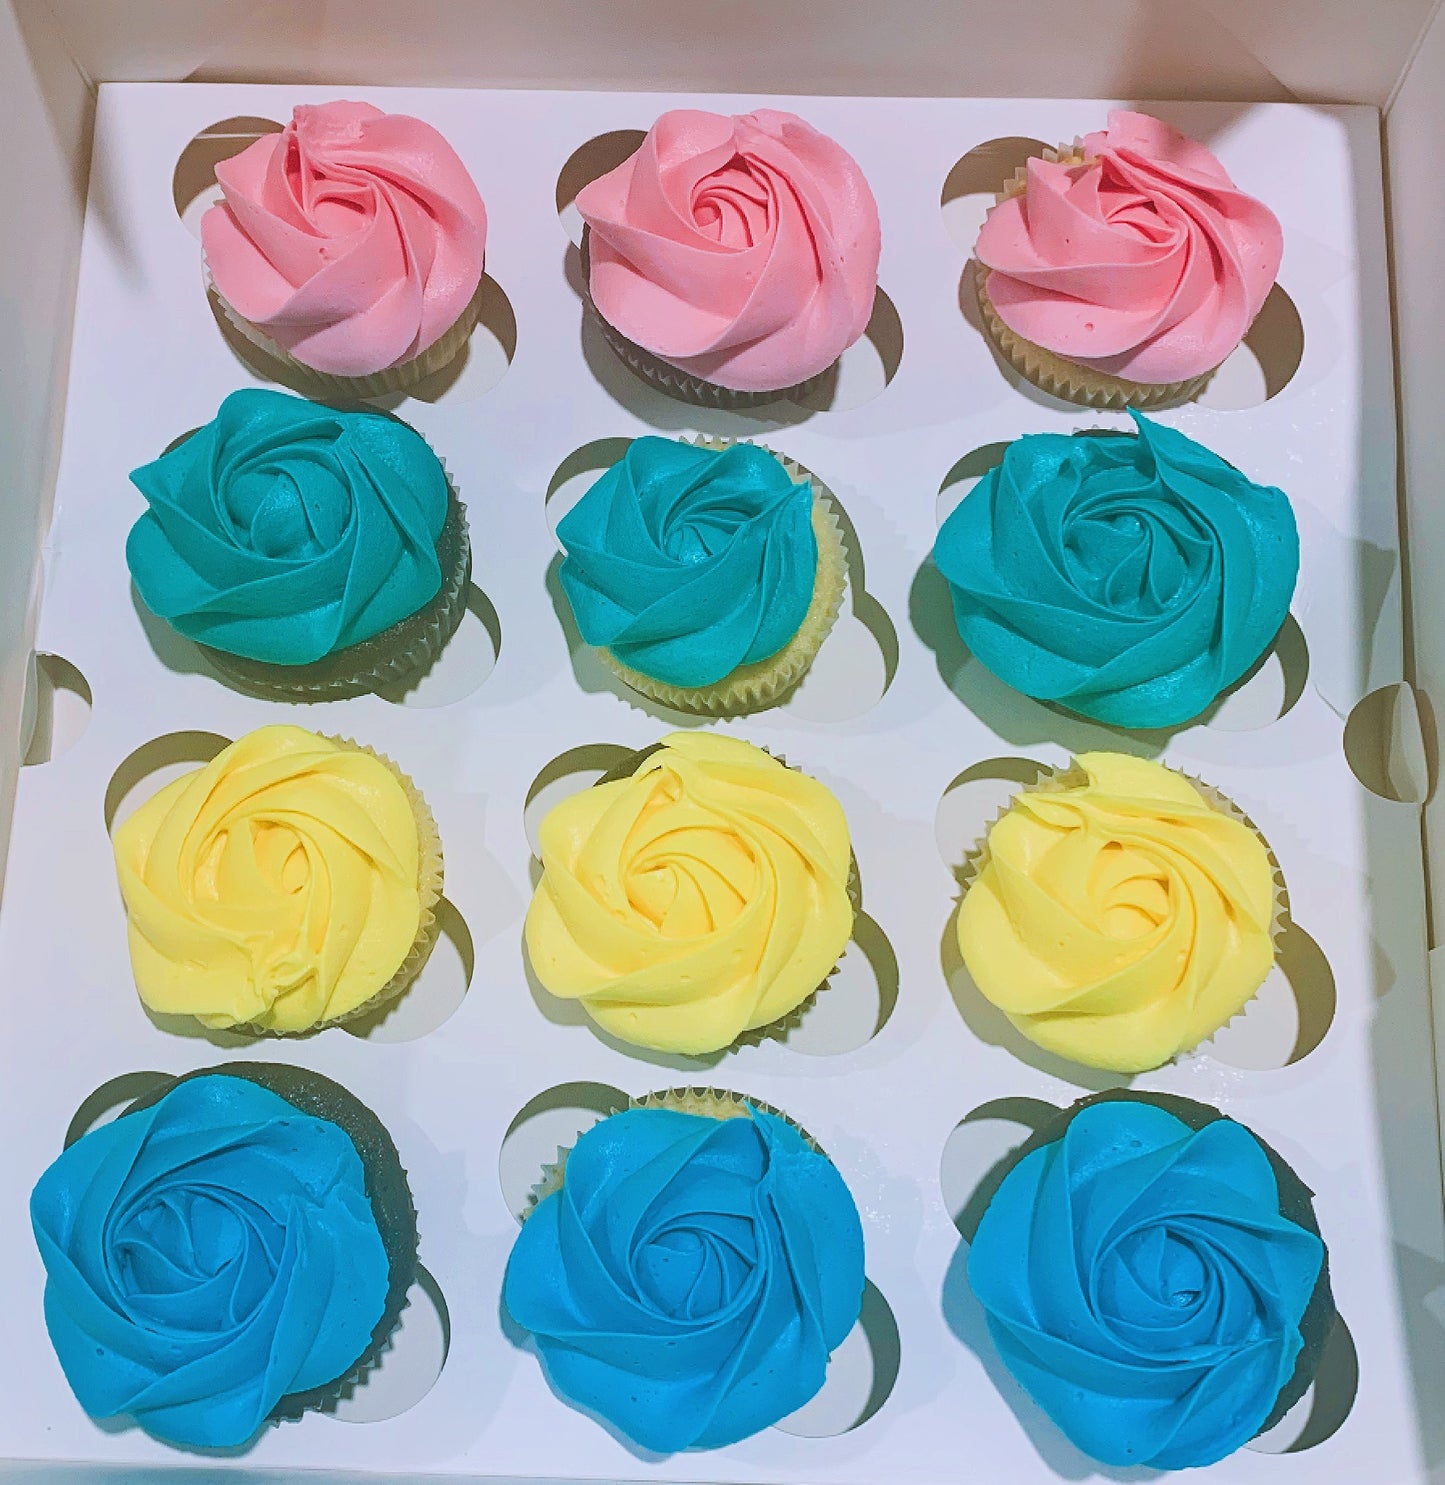 Work Place Lunch Cupcakes  (30)